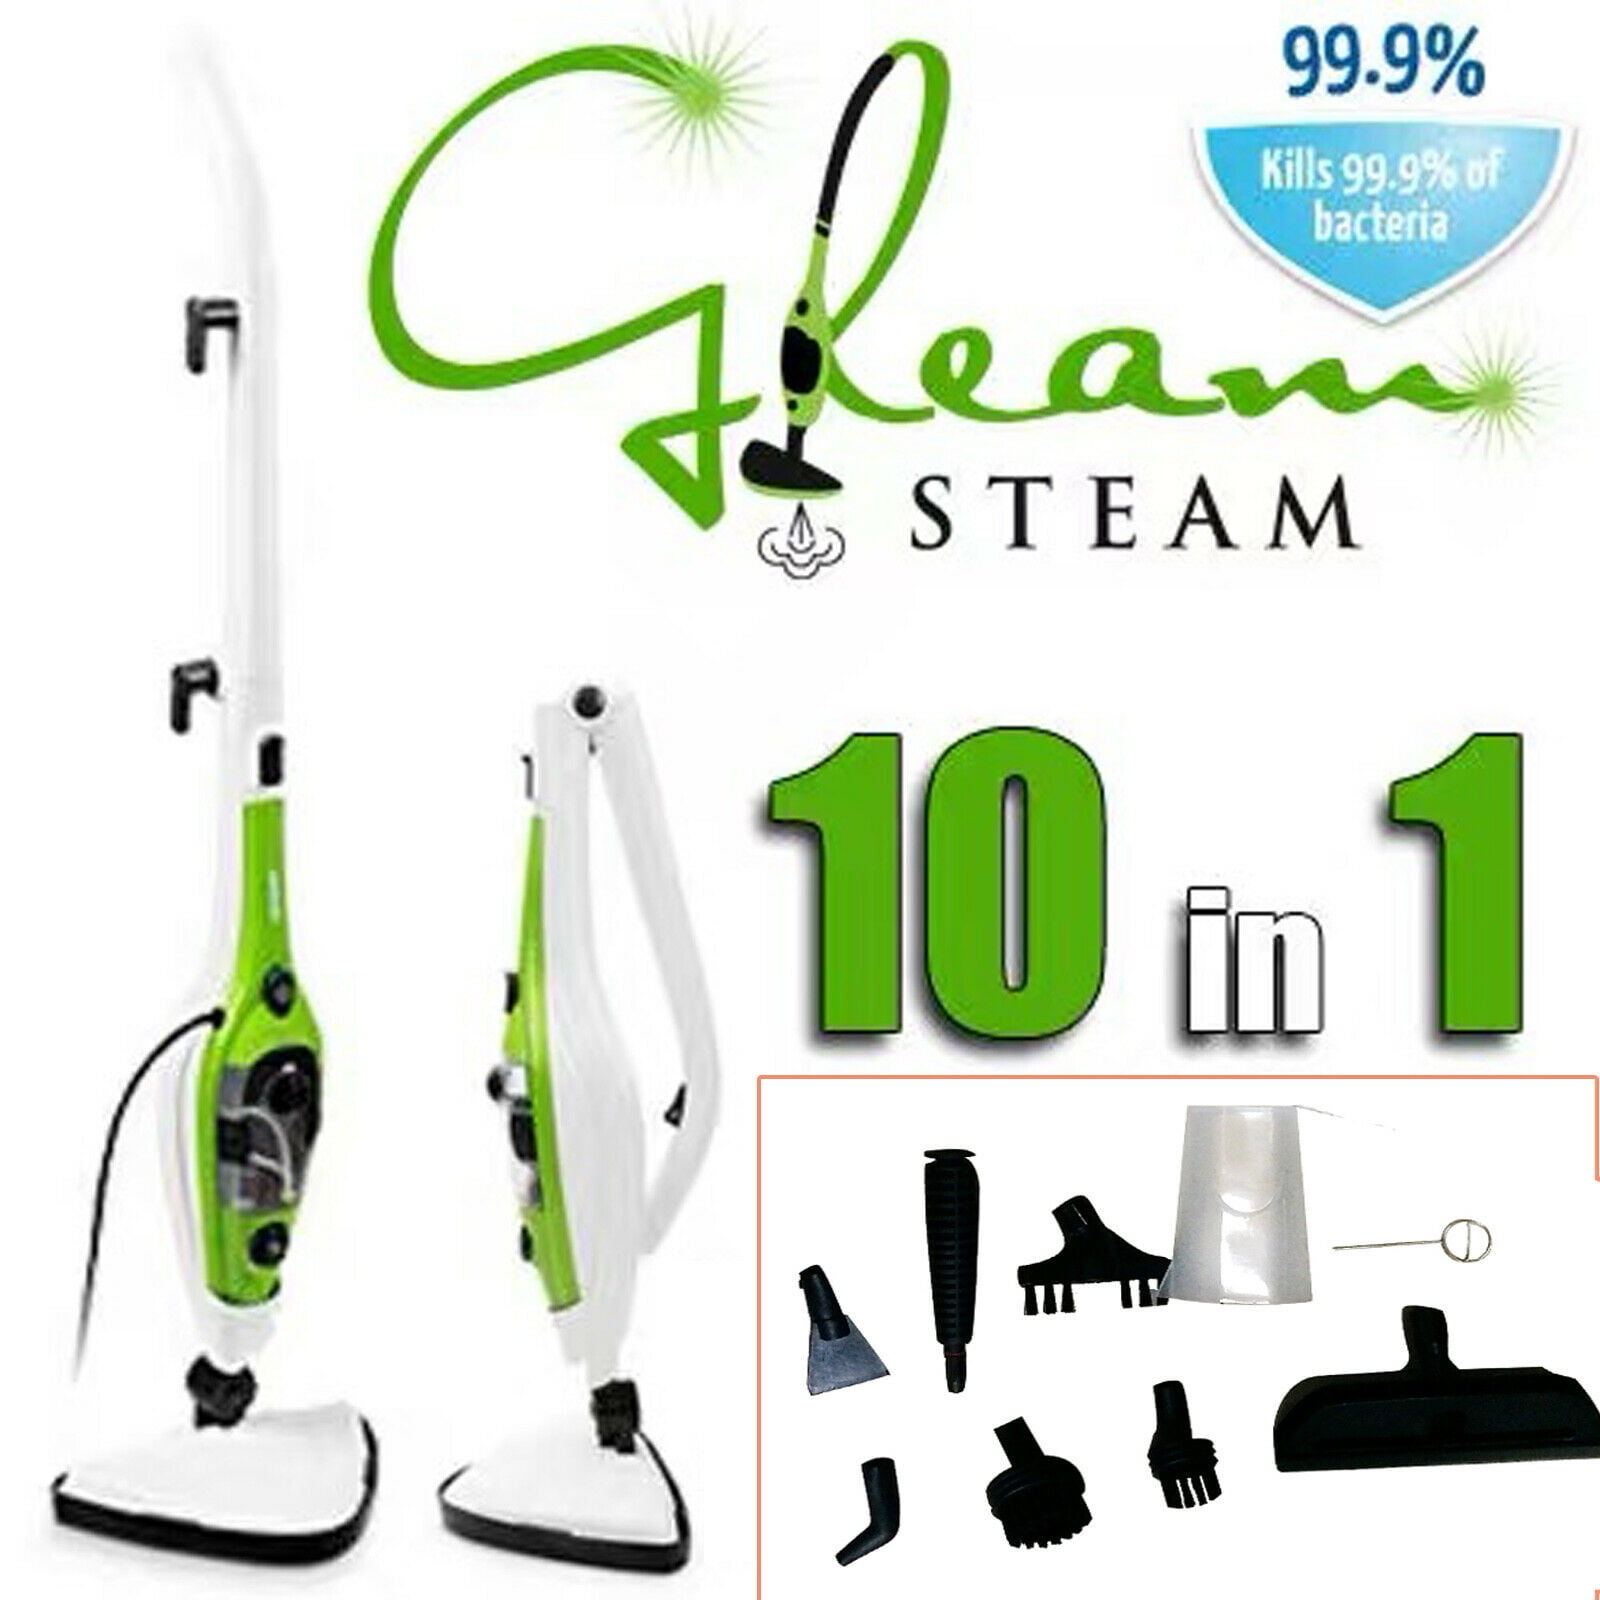  Steam Mop - 10-in-1 MultiPurpose Handheld Steam Cleaner  Detachable Floor Steamer for Hardwood/Tile/Laminate Floors Carpet with 11  Accessories for Whole Home Use.